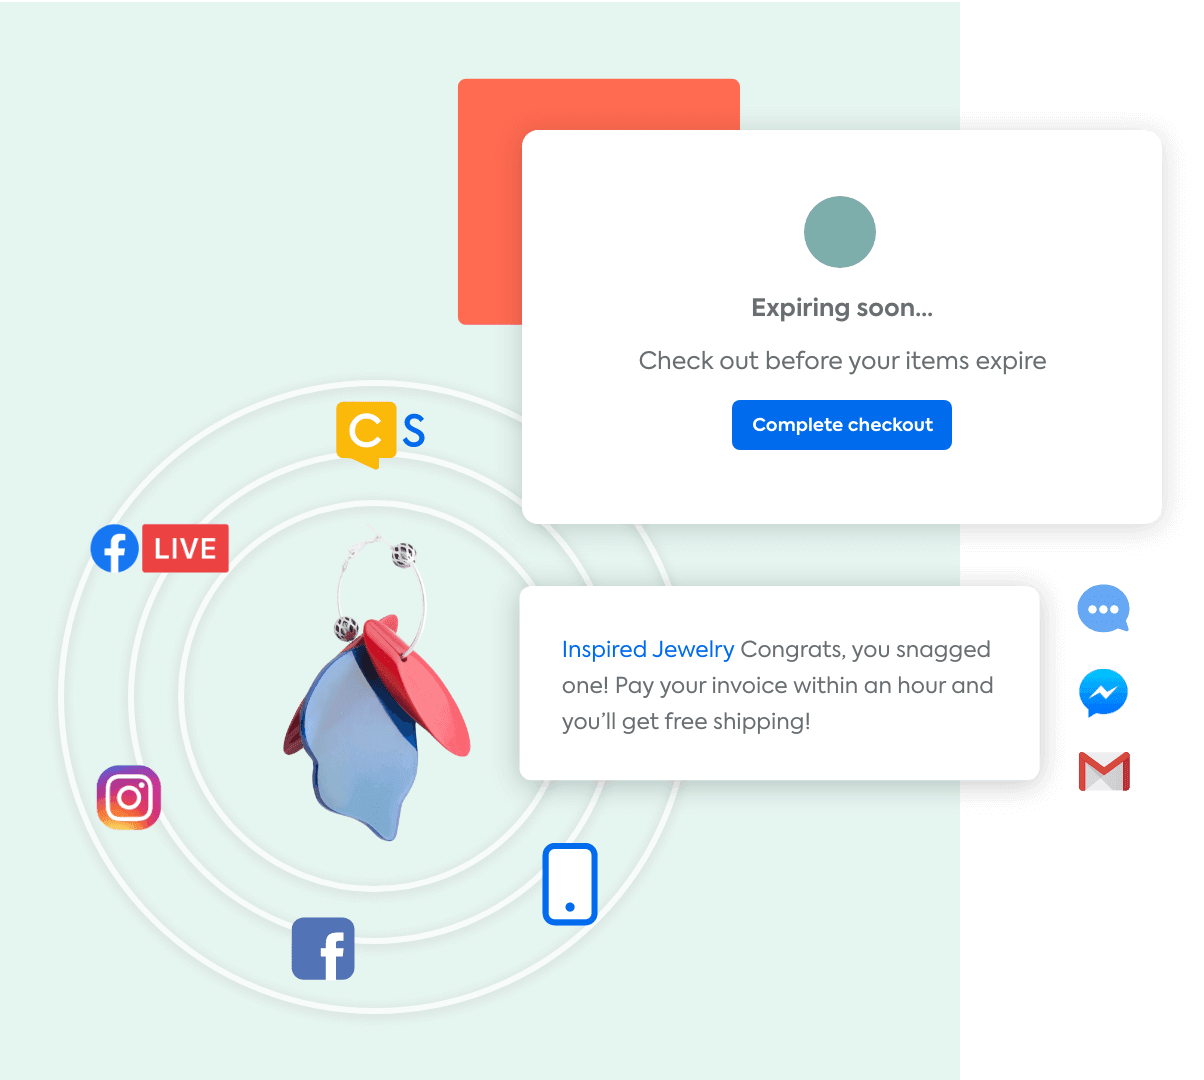 Boots surrounded by icons for Shopify, Instagram, website, CommentSold, Facebook, and mobile app